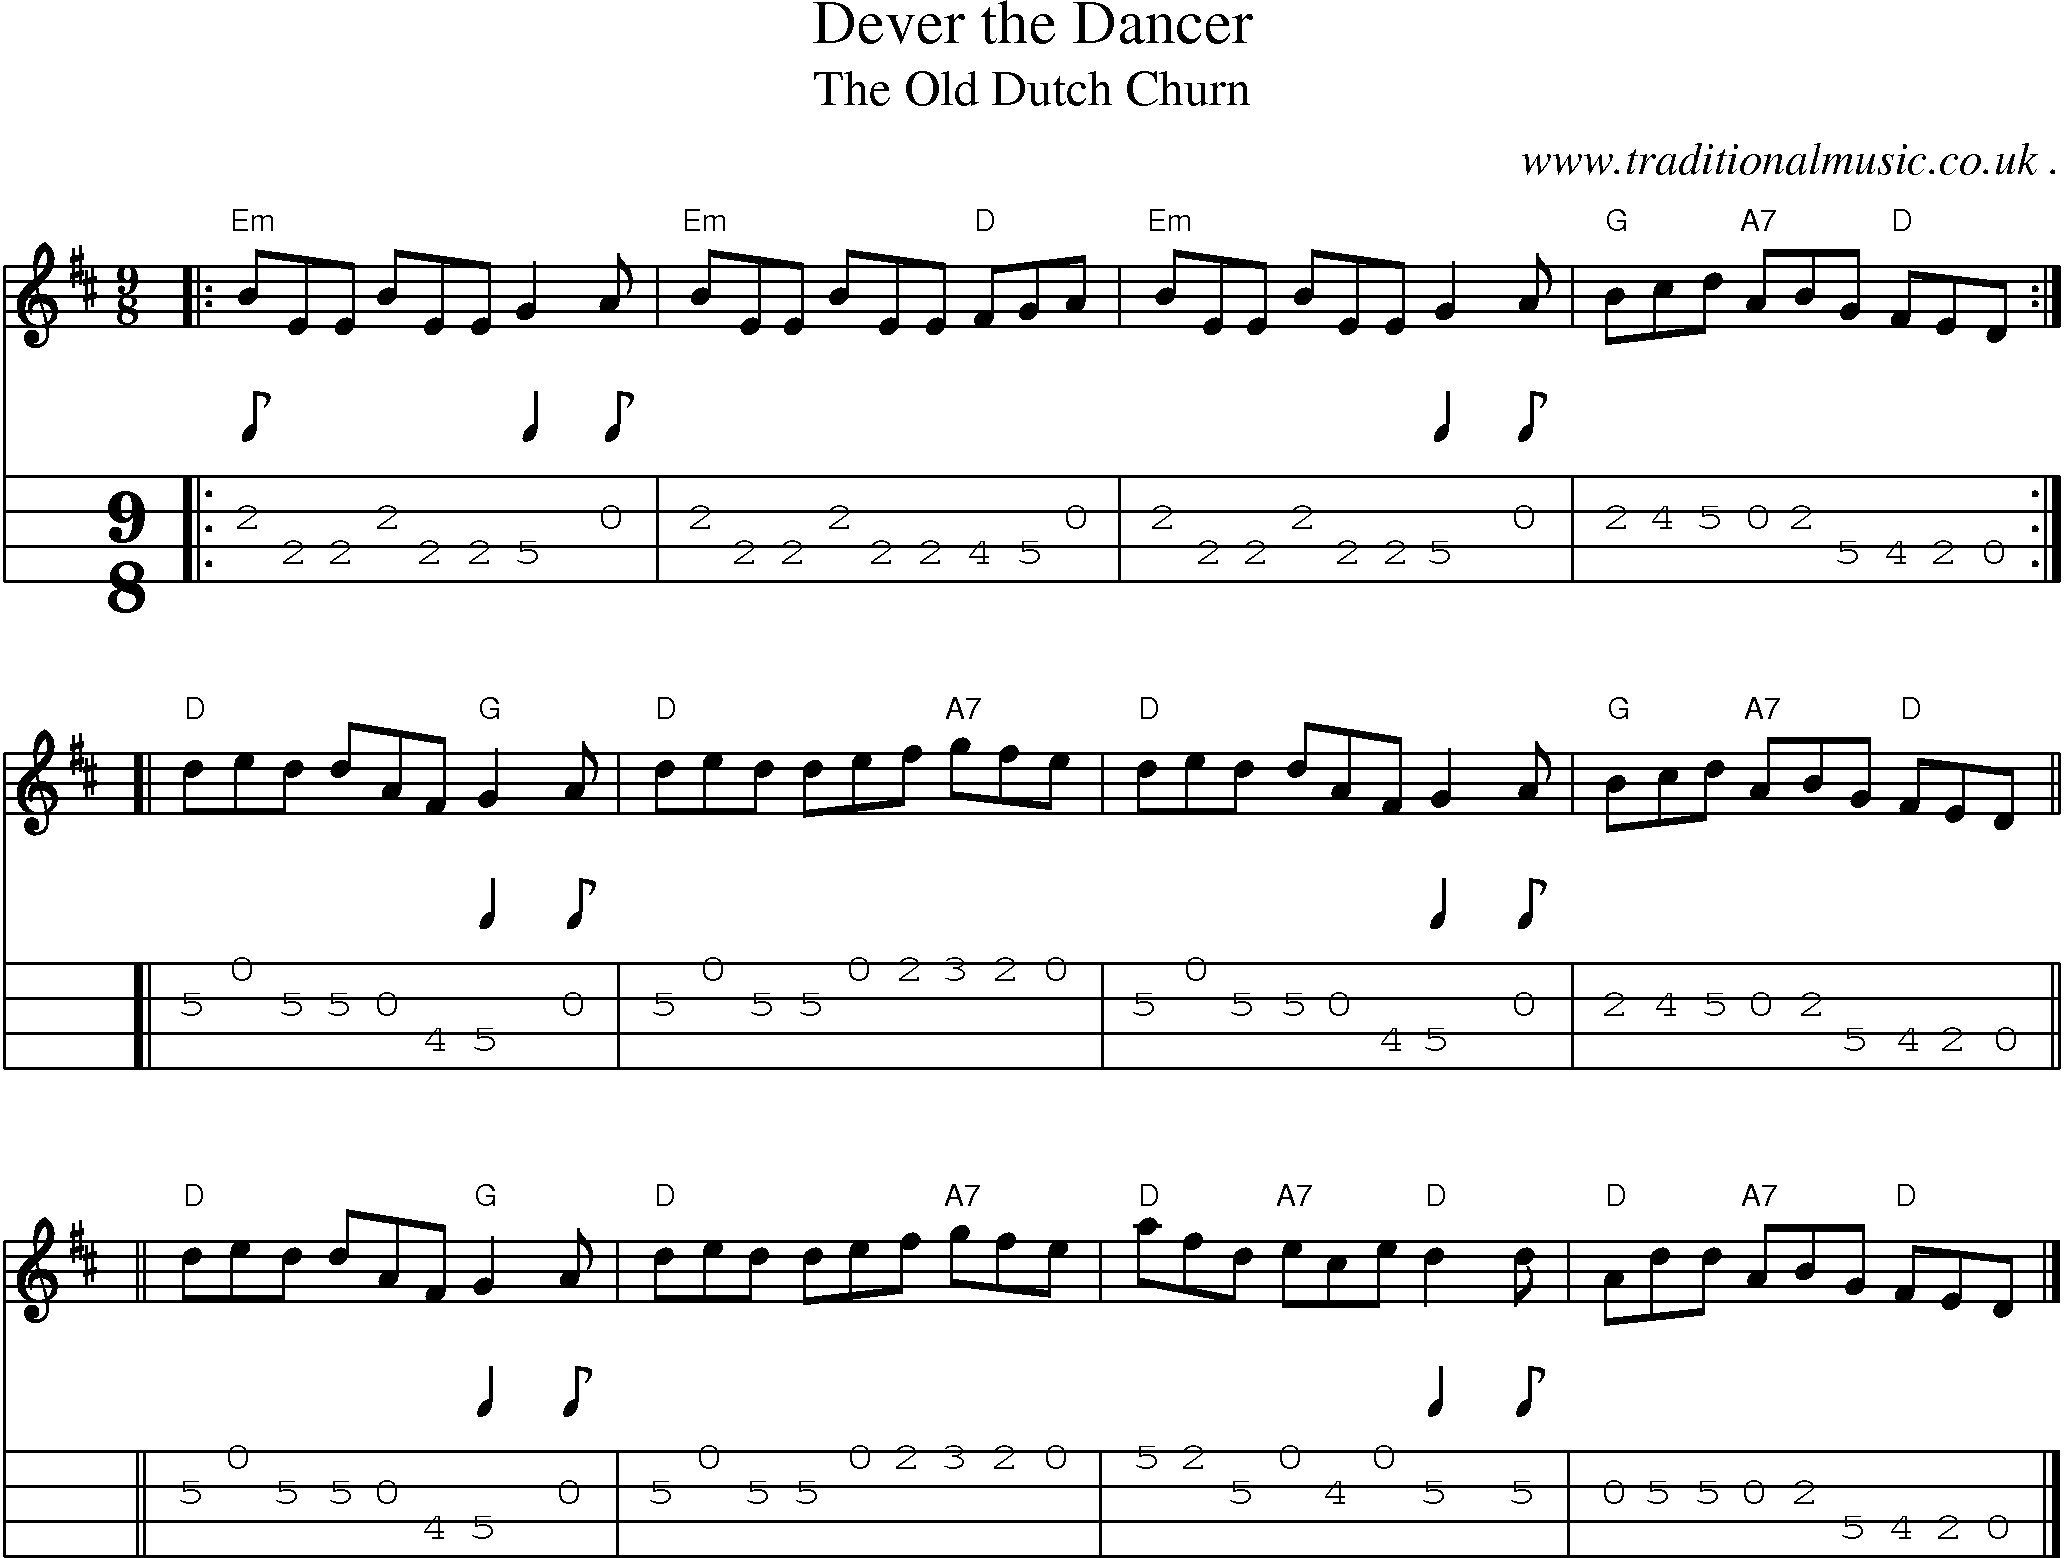 Sheet-music  score, Chords and Mandolin Tabs for Dever The Dancer